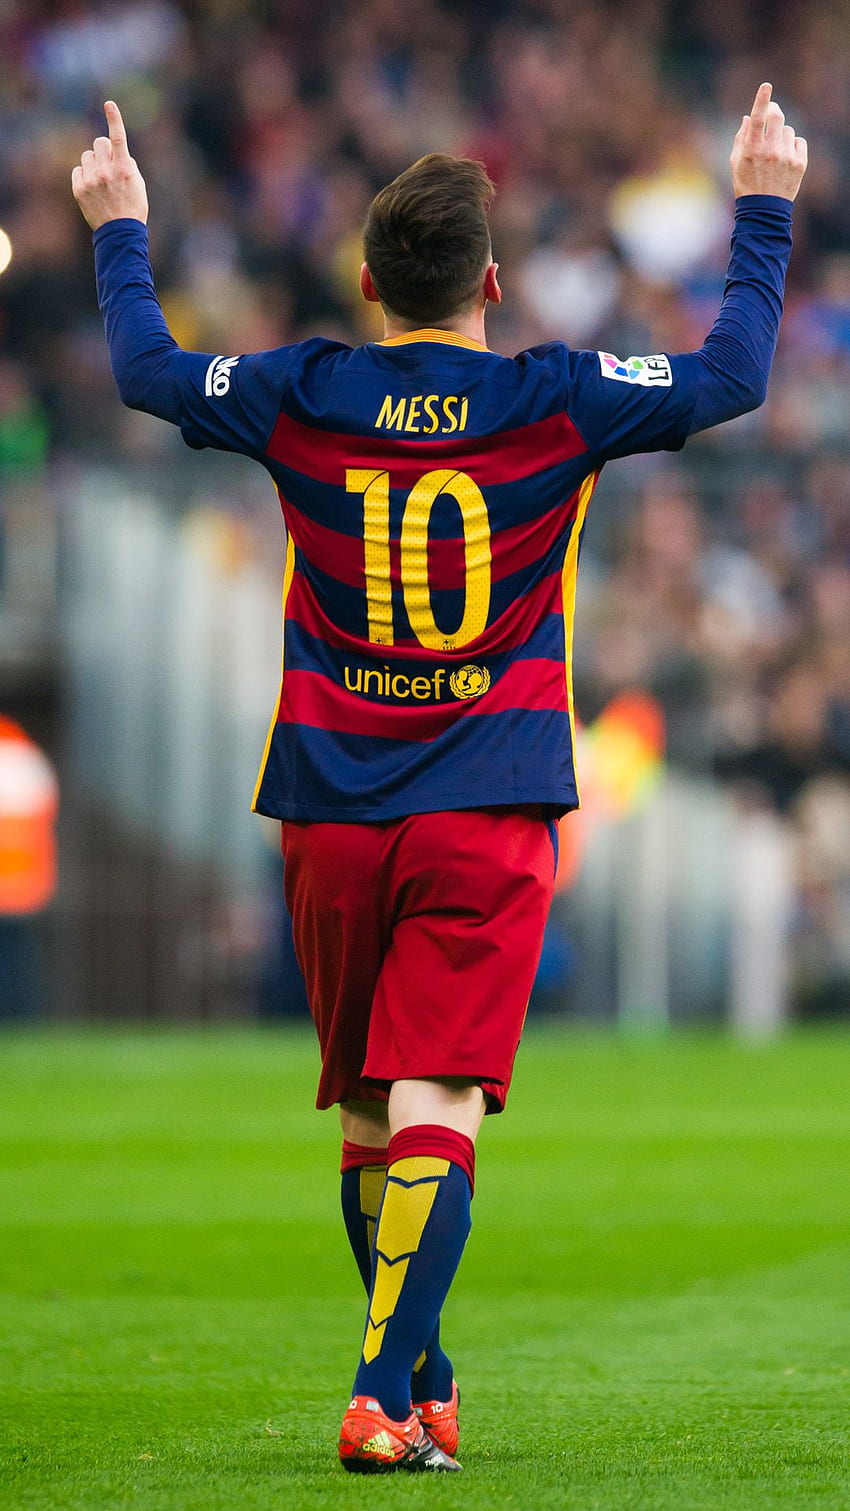 Lionel Messi Football Player 10 - Mobile Phone full HD phone wallpaper